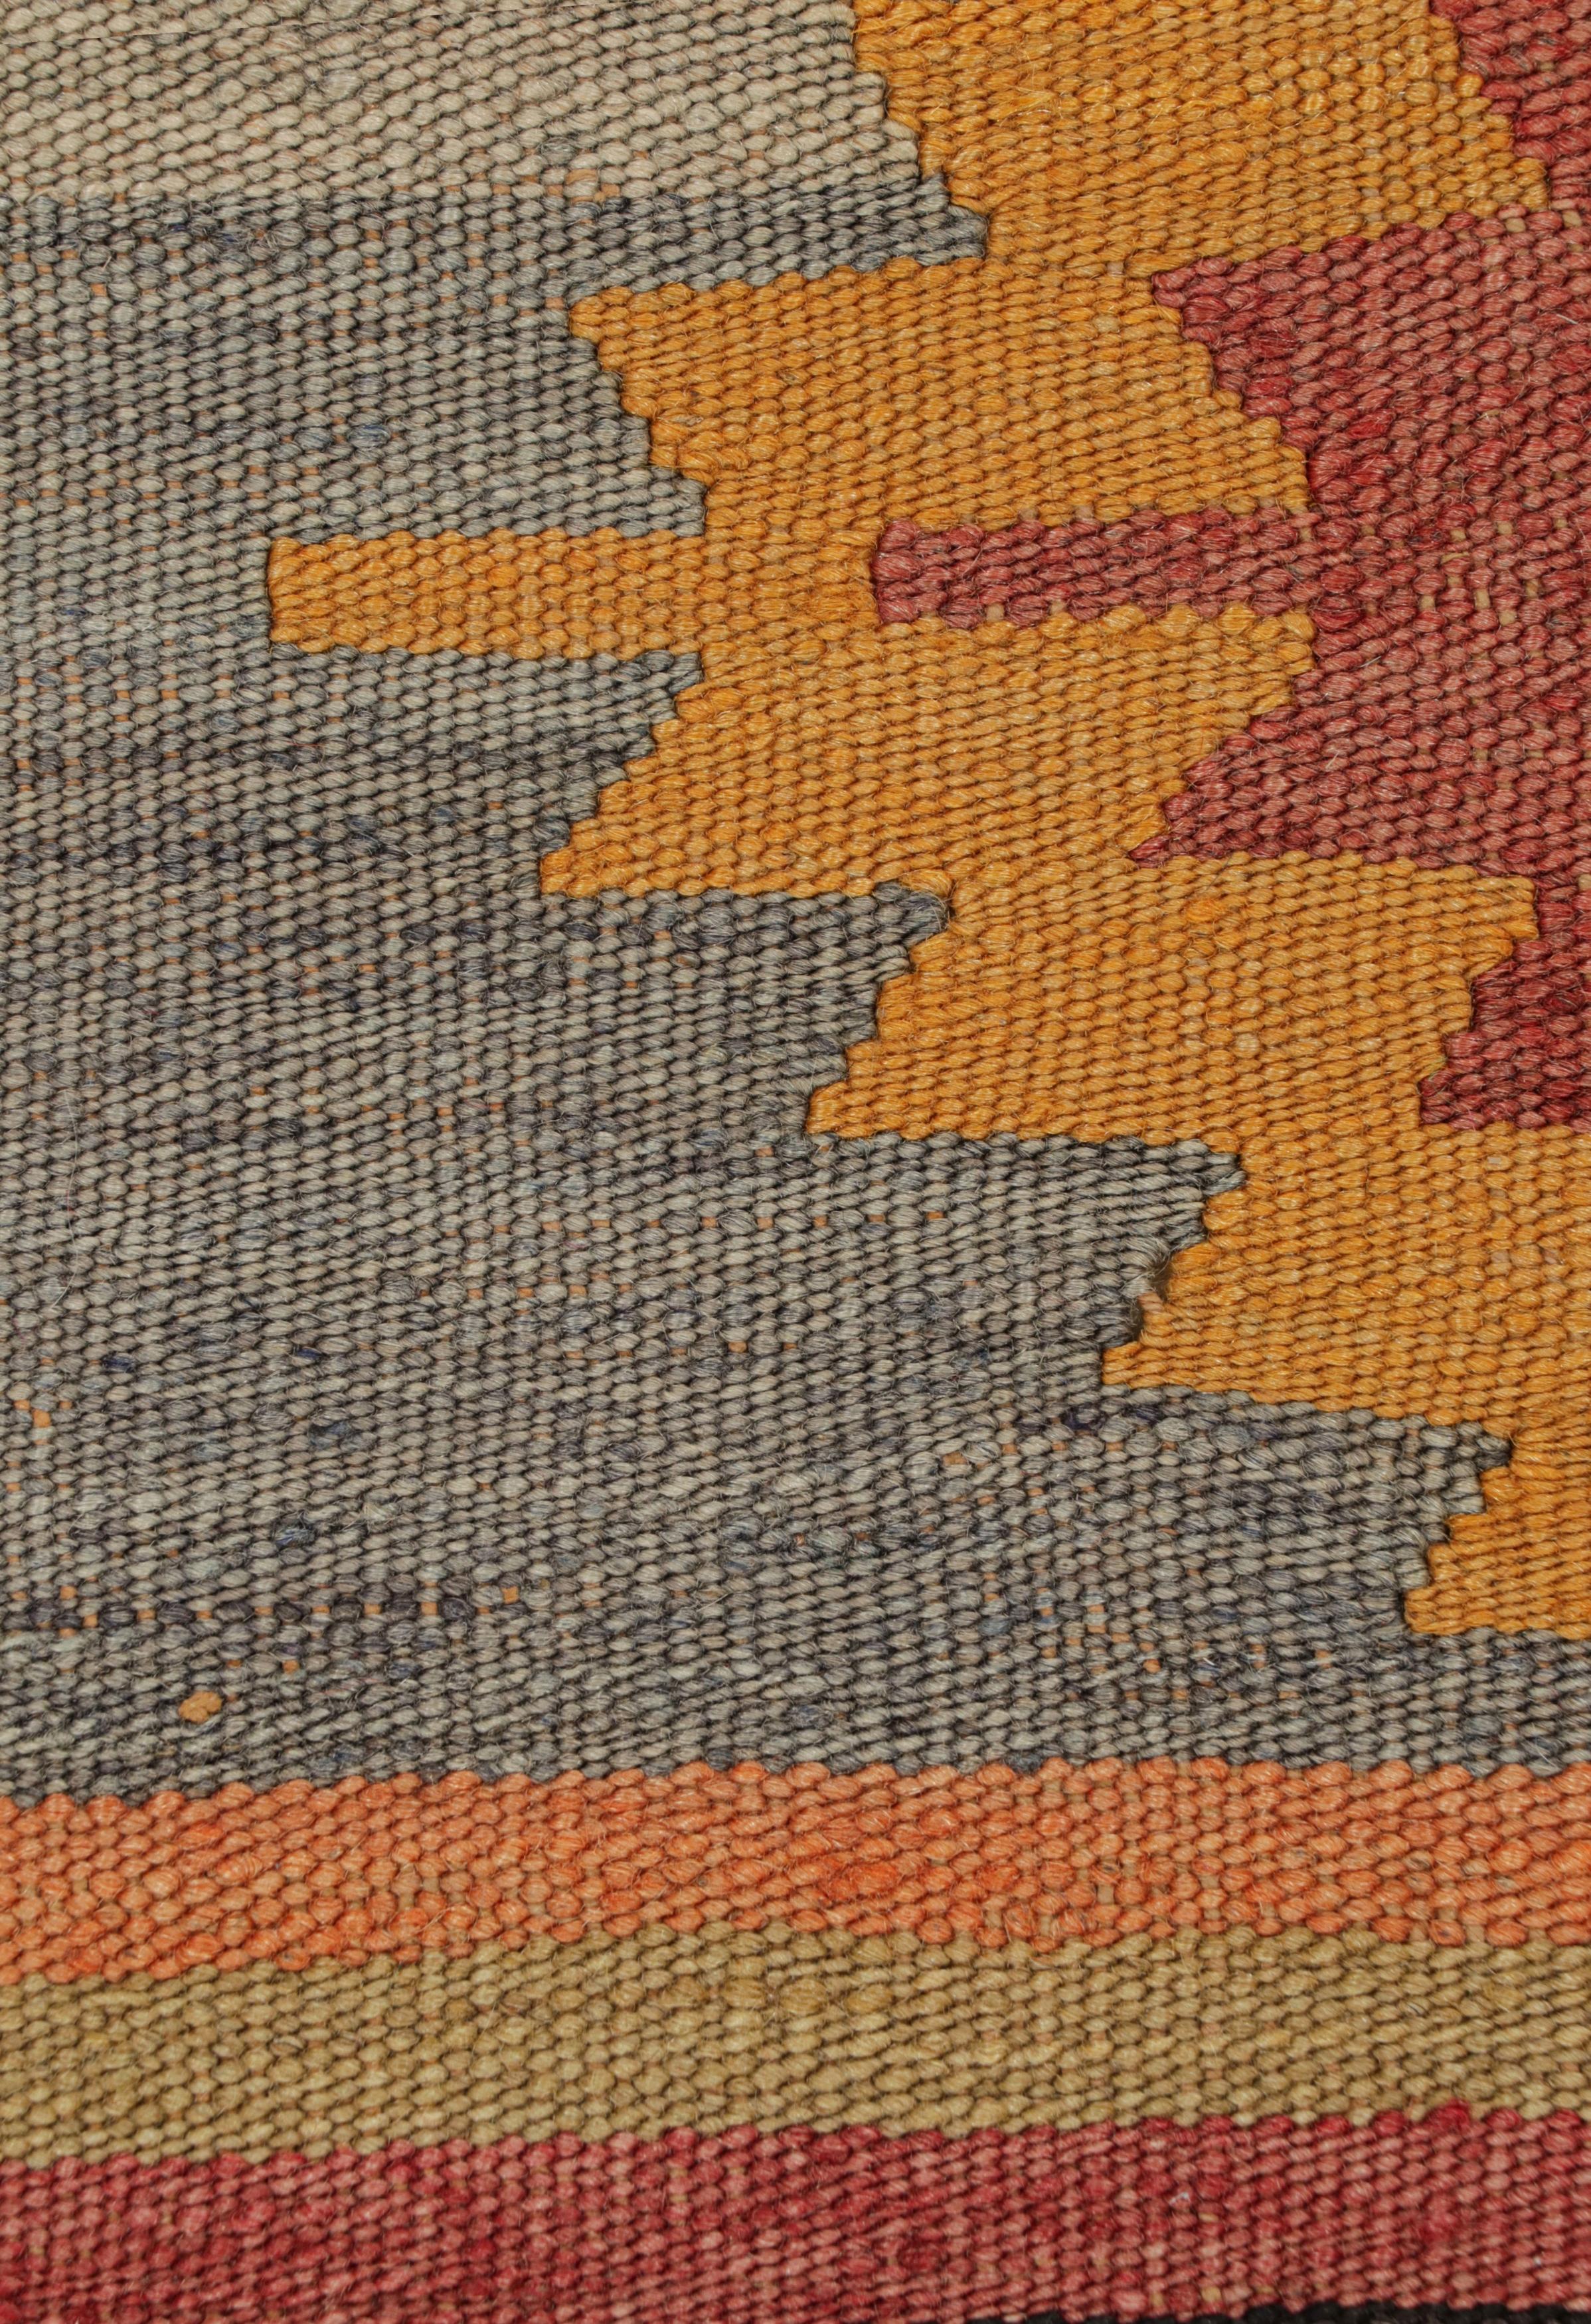 Vintage Turkish Orange and Purple Multi-Color Wool Kilim Rug by Rug & Kilim In Good Condition For Sale In Long Island City, NY